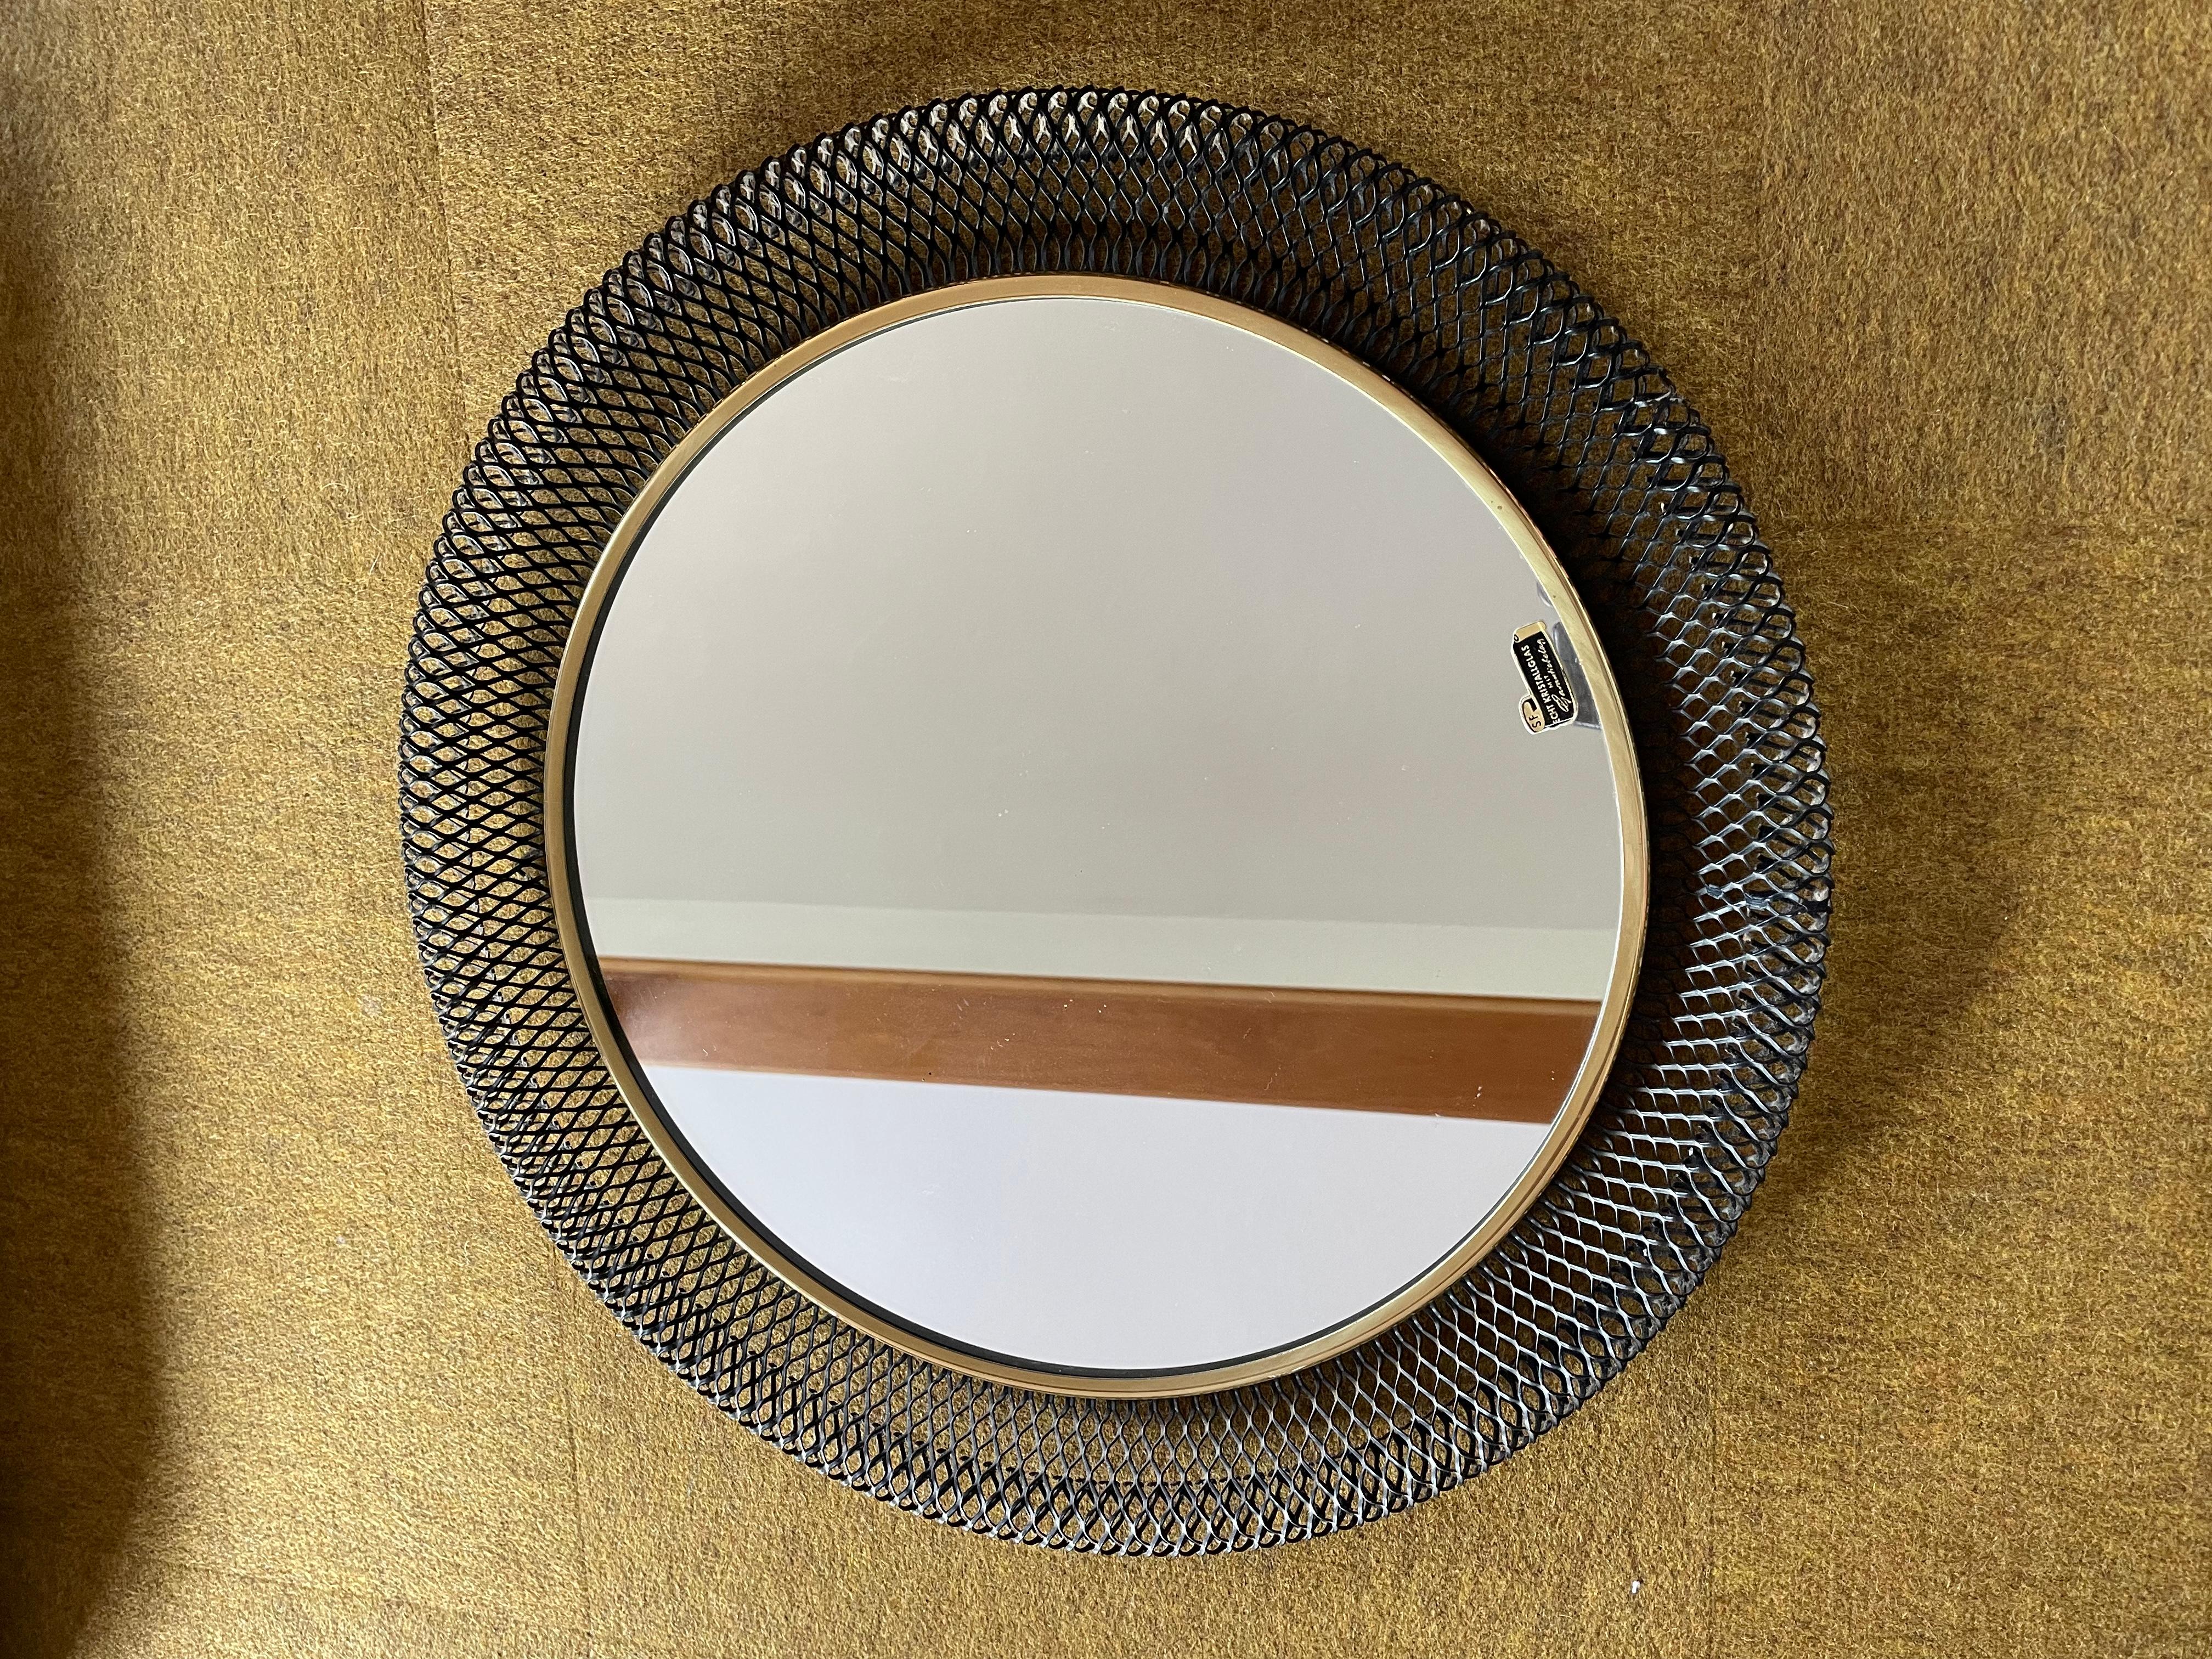 Article:

Wall mirror

Origin:

France

Design:

Remembers in design of Mategot

Age: 

1950s

This original vintage wall mirror was produced in the 1950s in France. it is made of solid metal with a metal grid perforation in black lacquered tone;